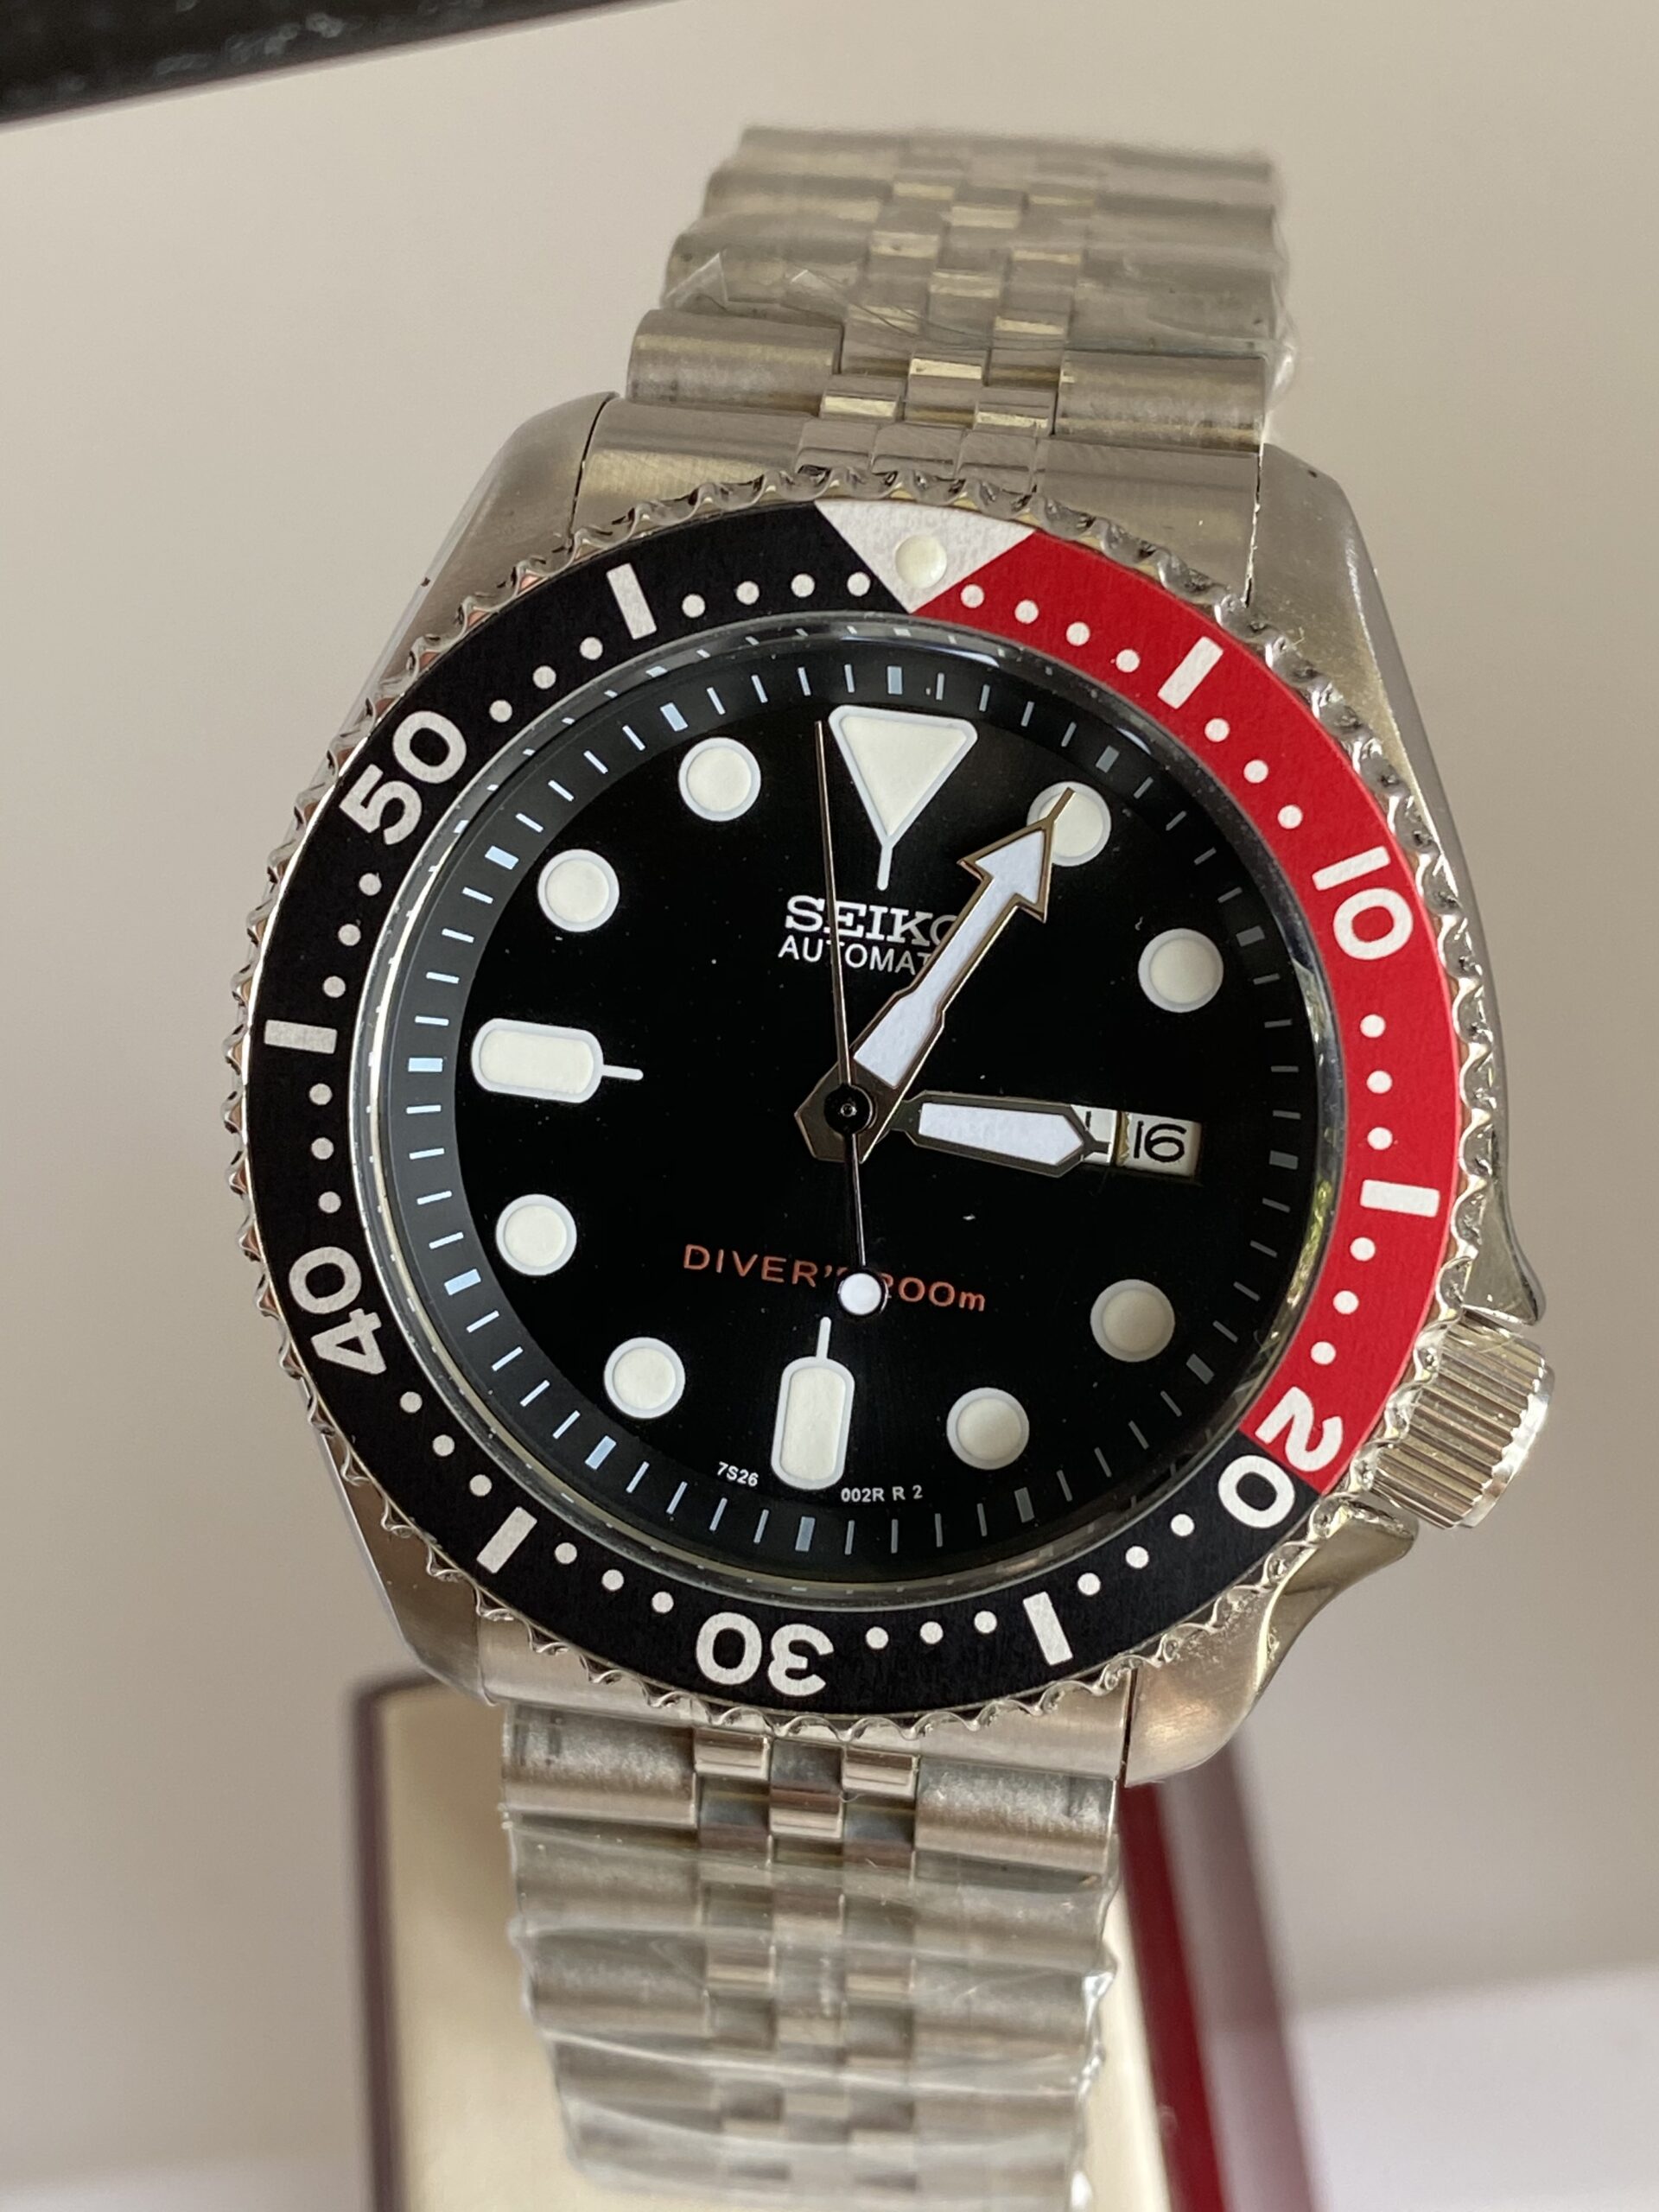 New, Unused 2018 Seiko SKX007 200m Scuba Diver Modified with Coke Bezel and  Upgraded Seiko 4R36A 24Jewel Automatic Movement – Corr Vintage Watches